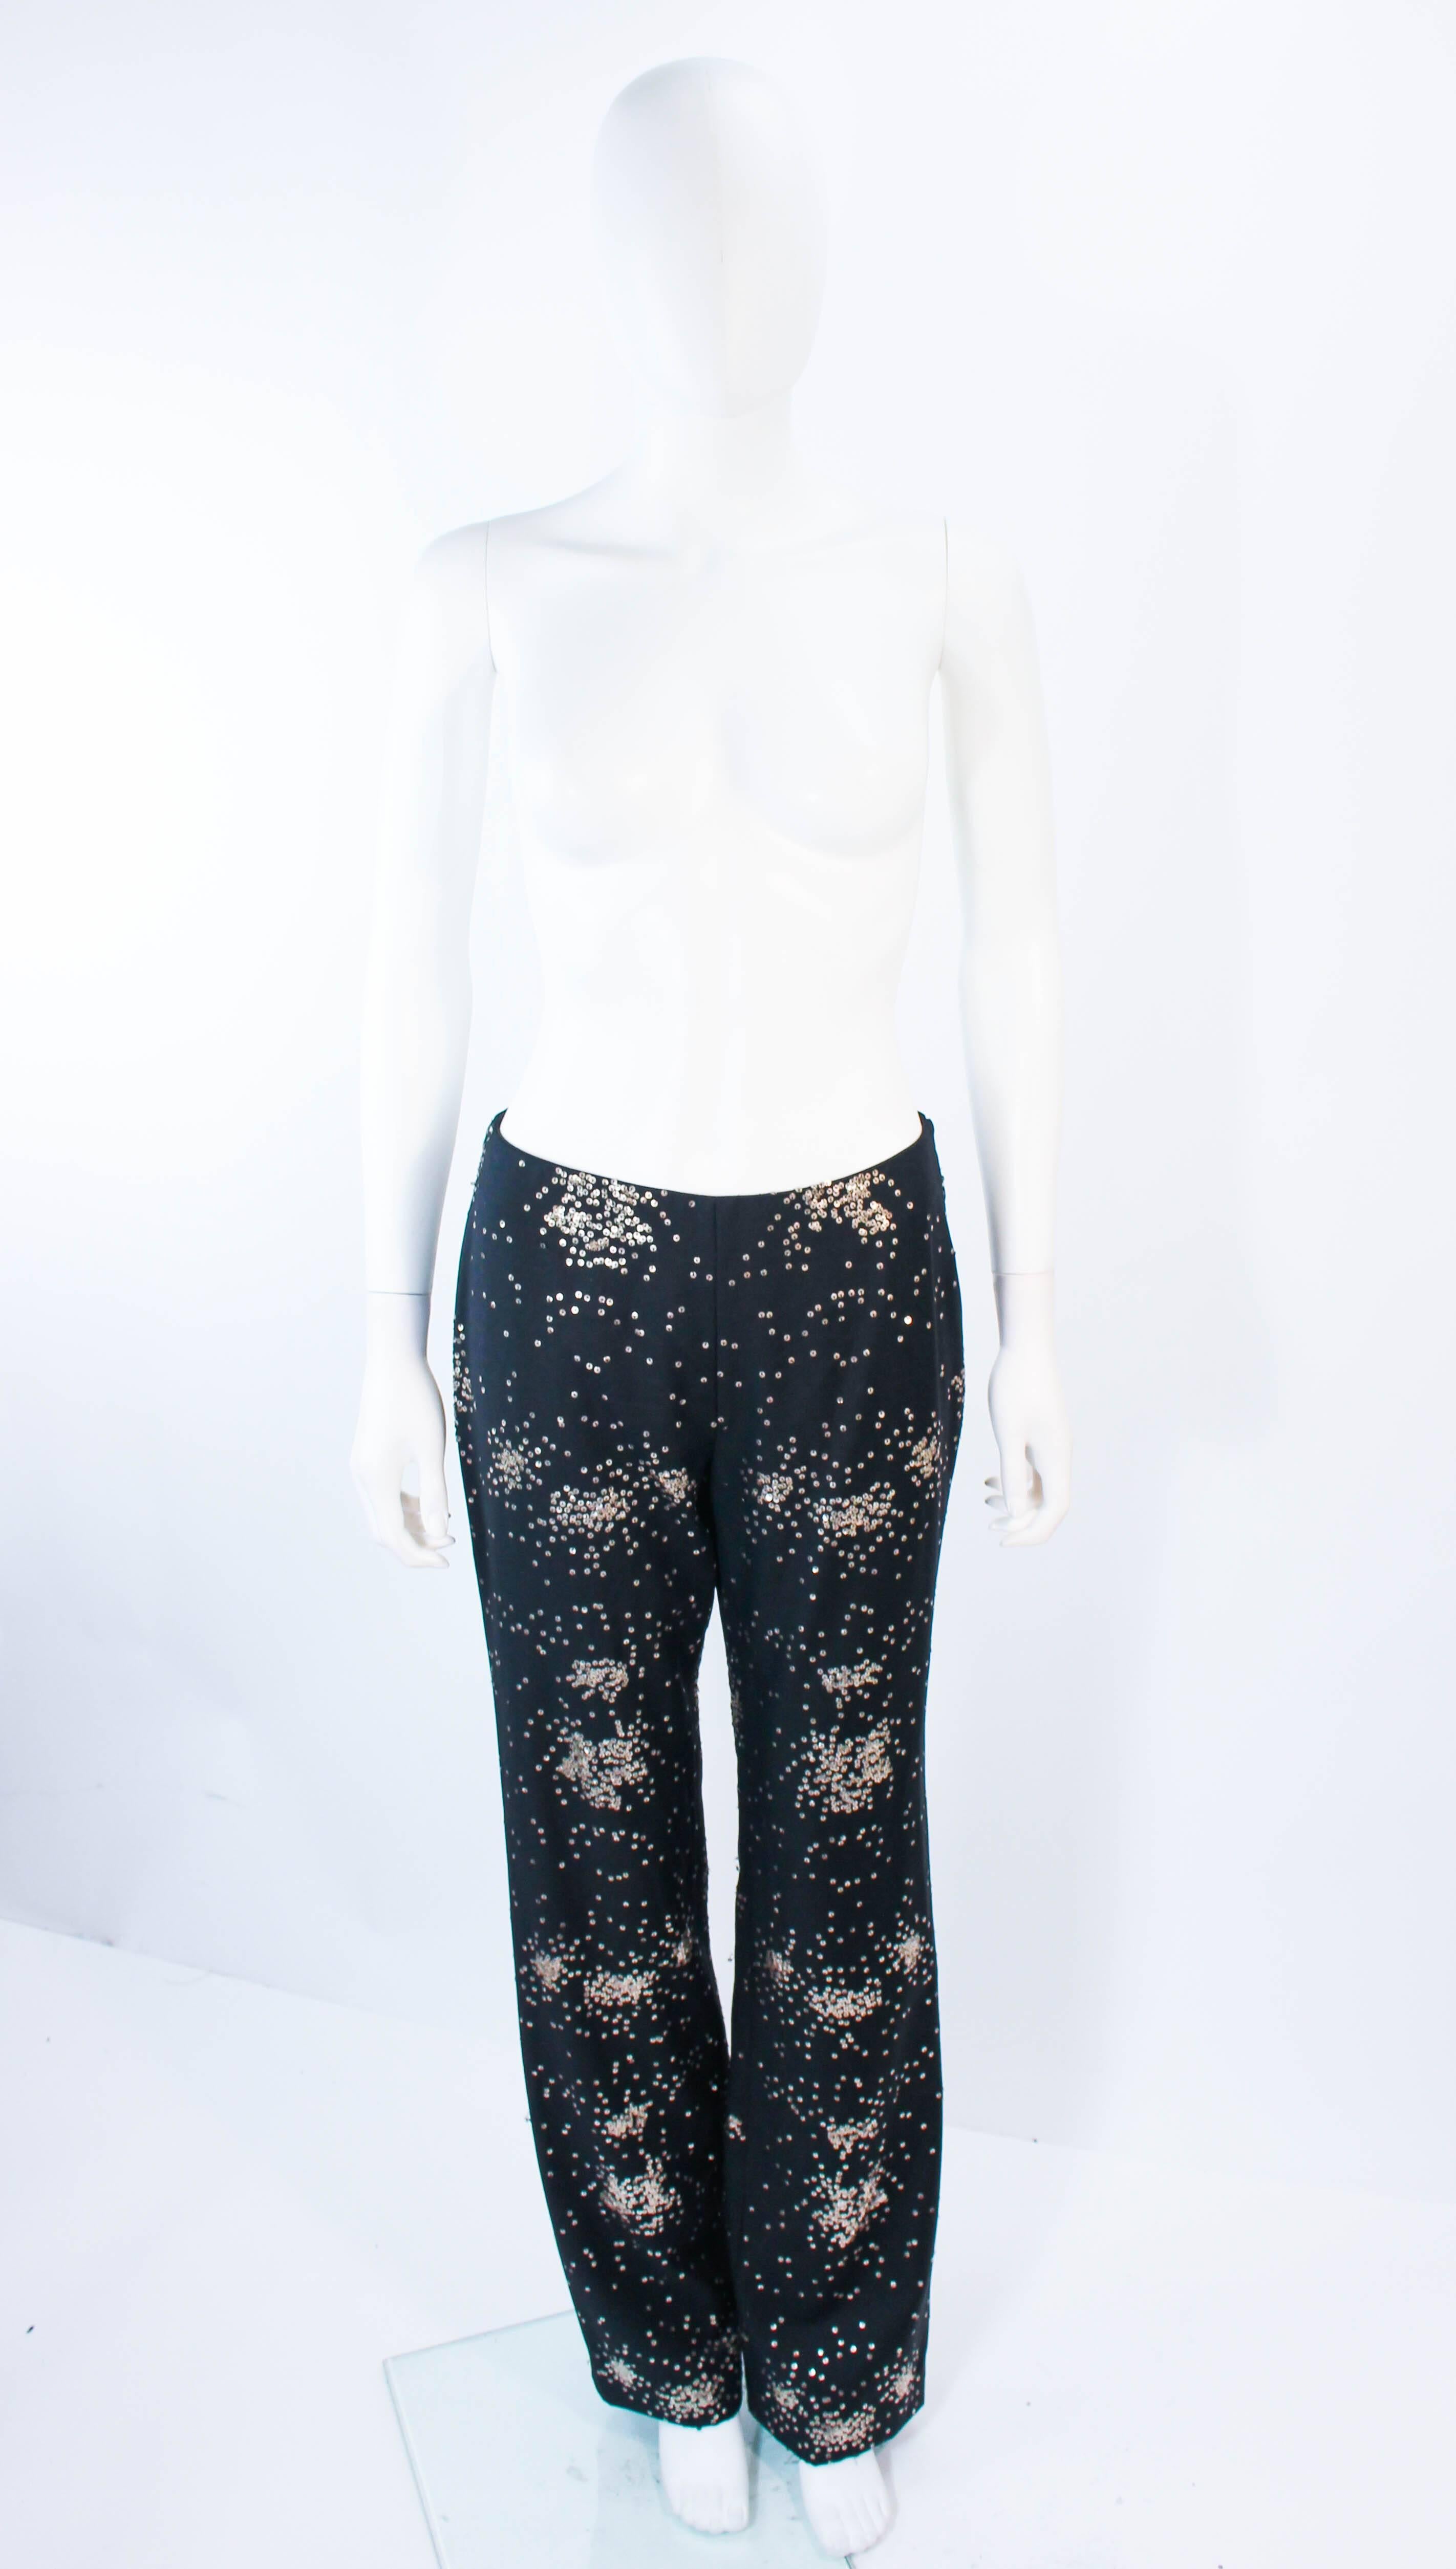 These Ozbek pants are composed of a black fabric with metal sequin applique. Feature a bootleg flare style with a side zipper closure. In excellent vintage condition.

**Please cross-reference measurements for personal accuracy. Size in description